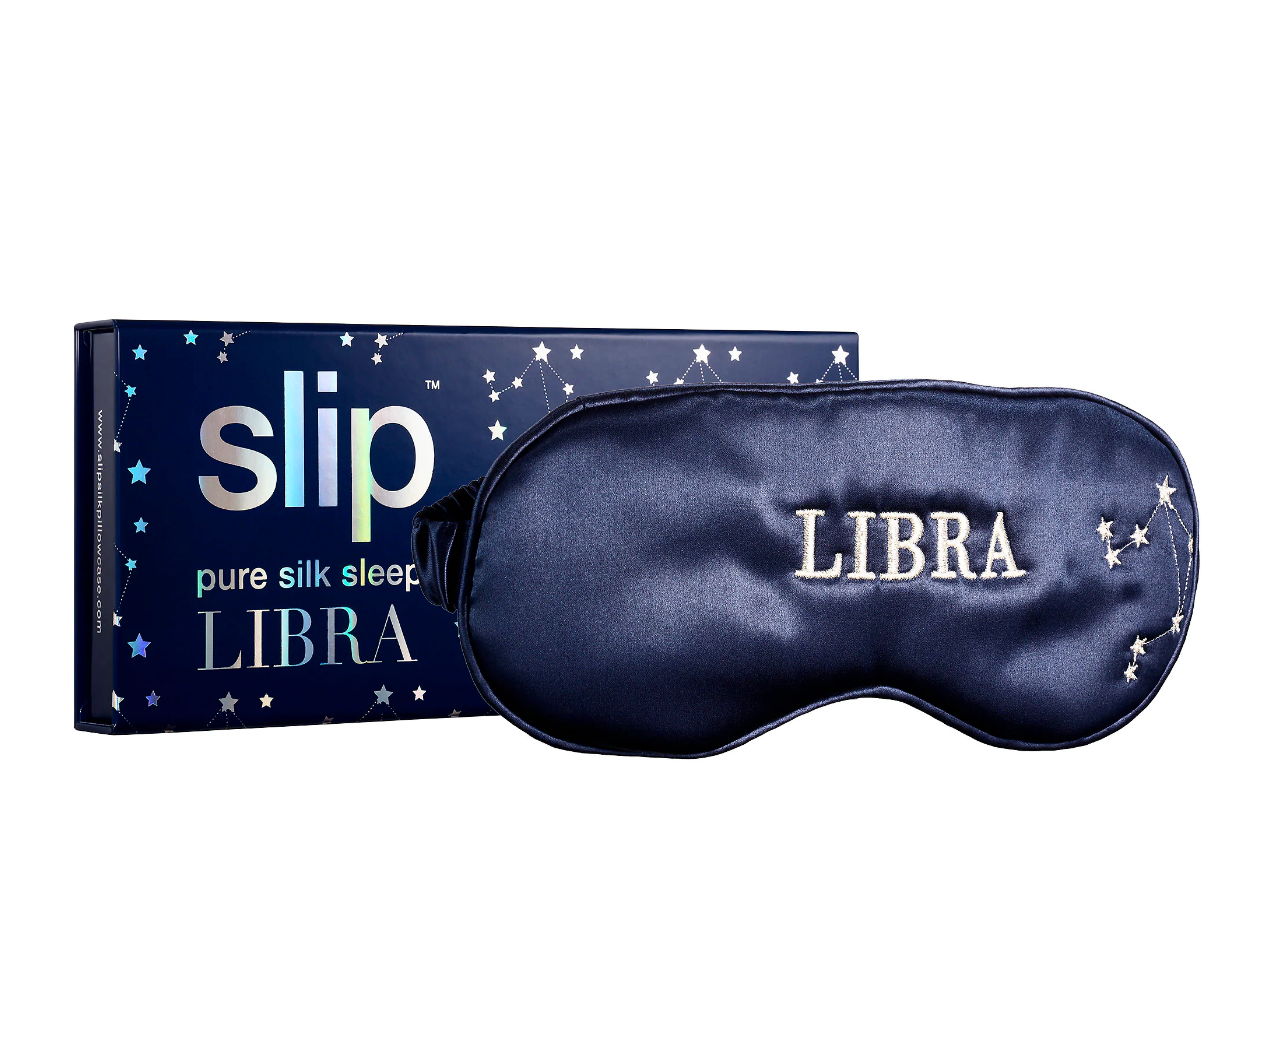 Let Your Lovely Libra Know You Care With These Spot-On Gifts